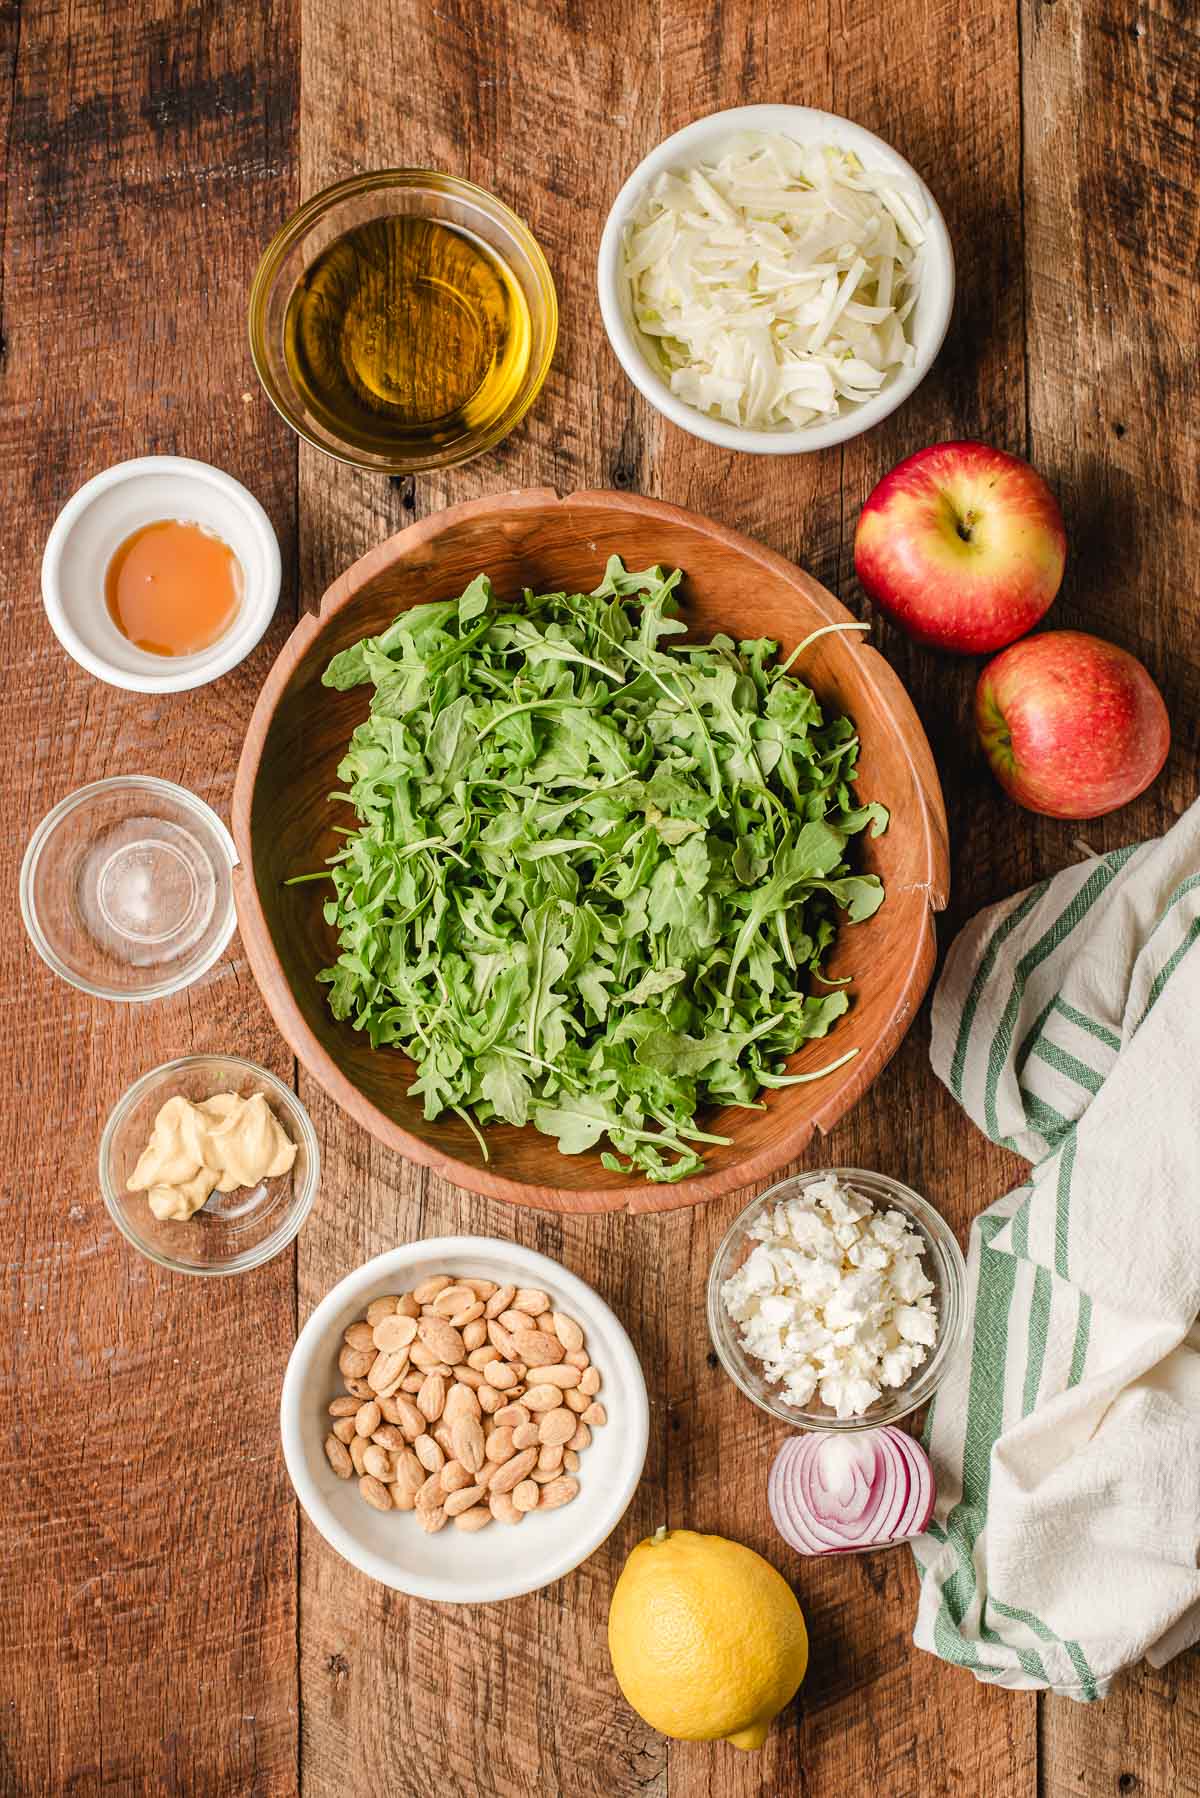 Arugula, marcona almonds, goat cheese, dijon mustard, olive oil, lemon juice, apples, fennel, rice vinegar, and red onion on a wooden background.